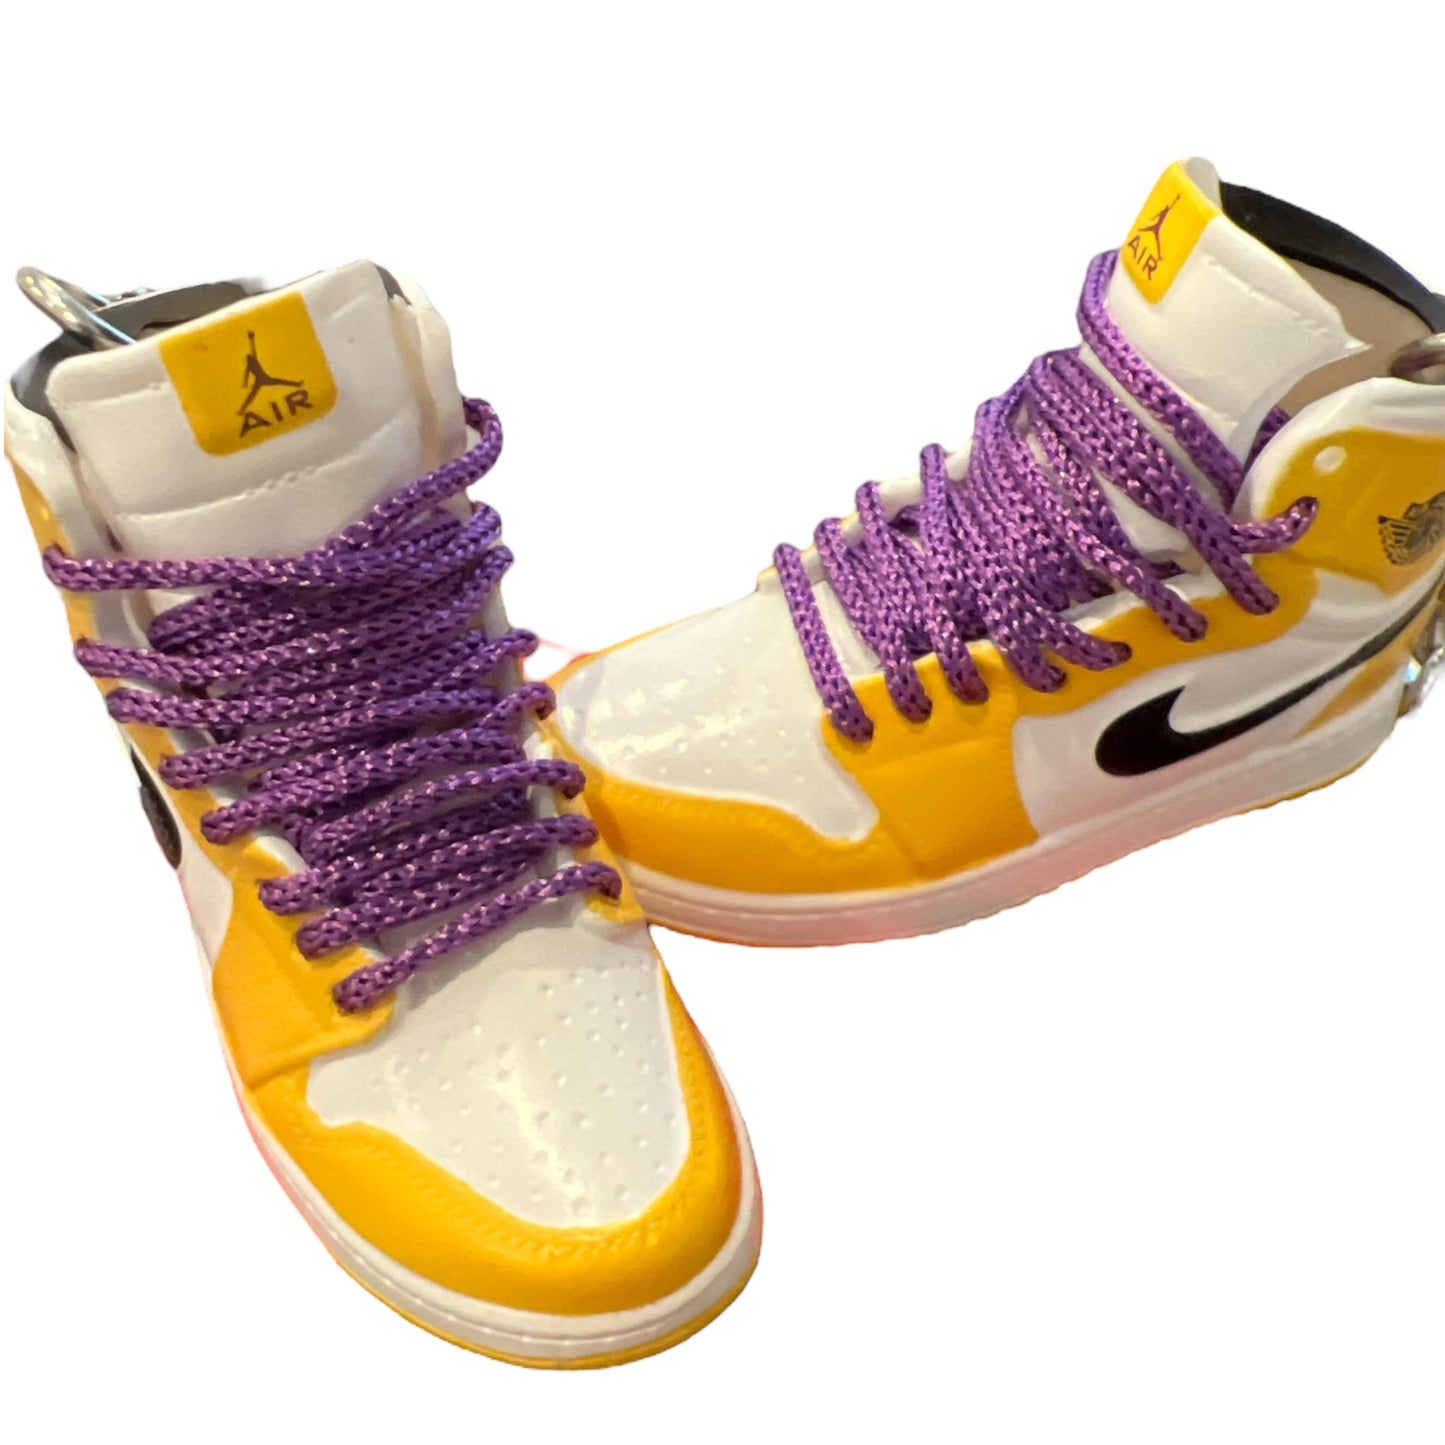 Air Jordan Lakers 3D Keychain - Something about Sofia